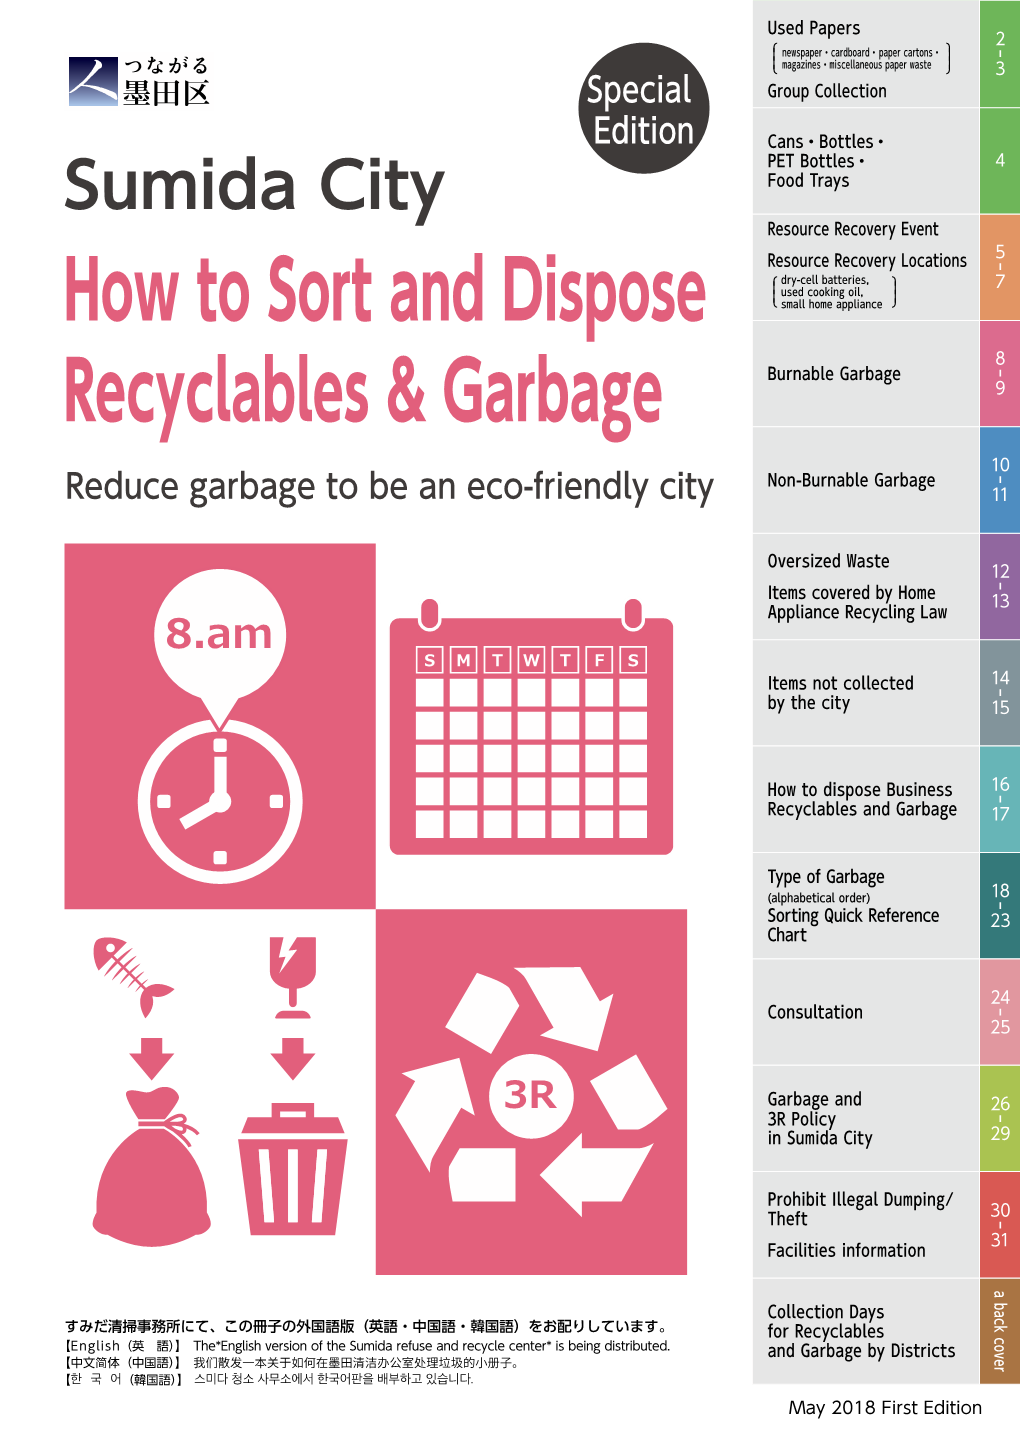 How to Sort and Dispose Recyclables & Garbage